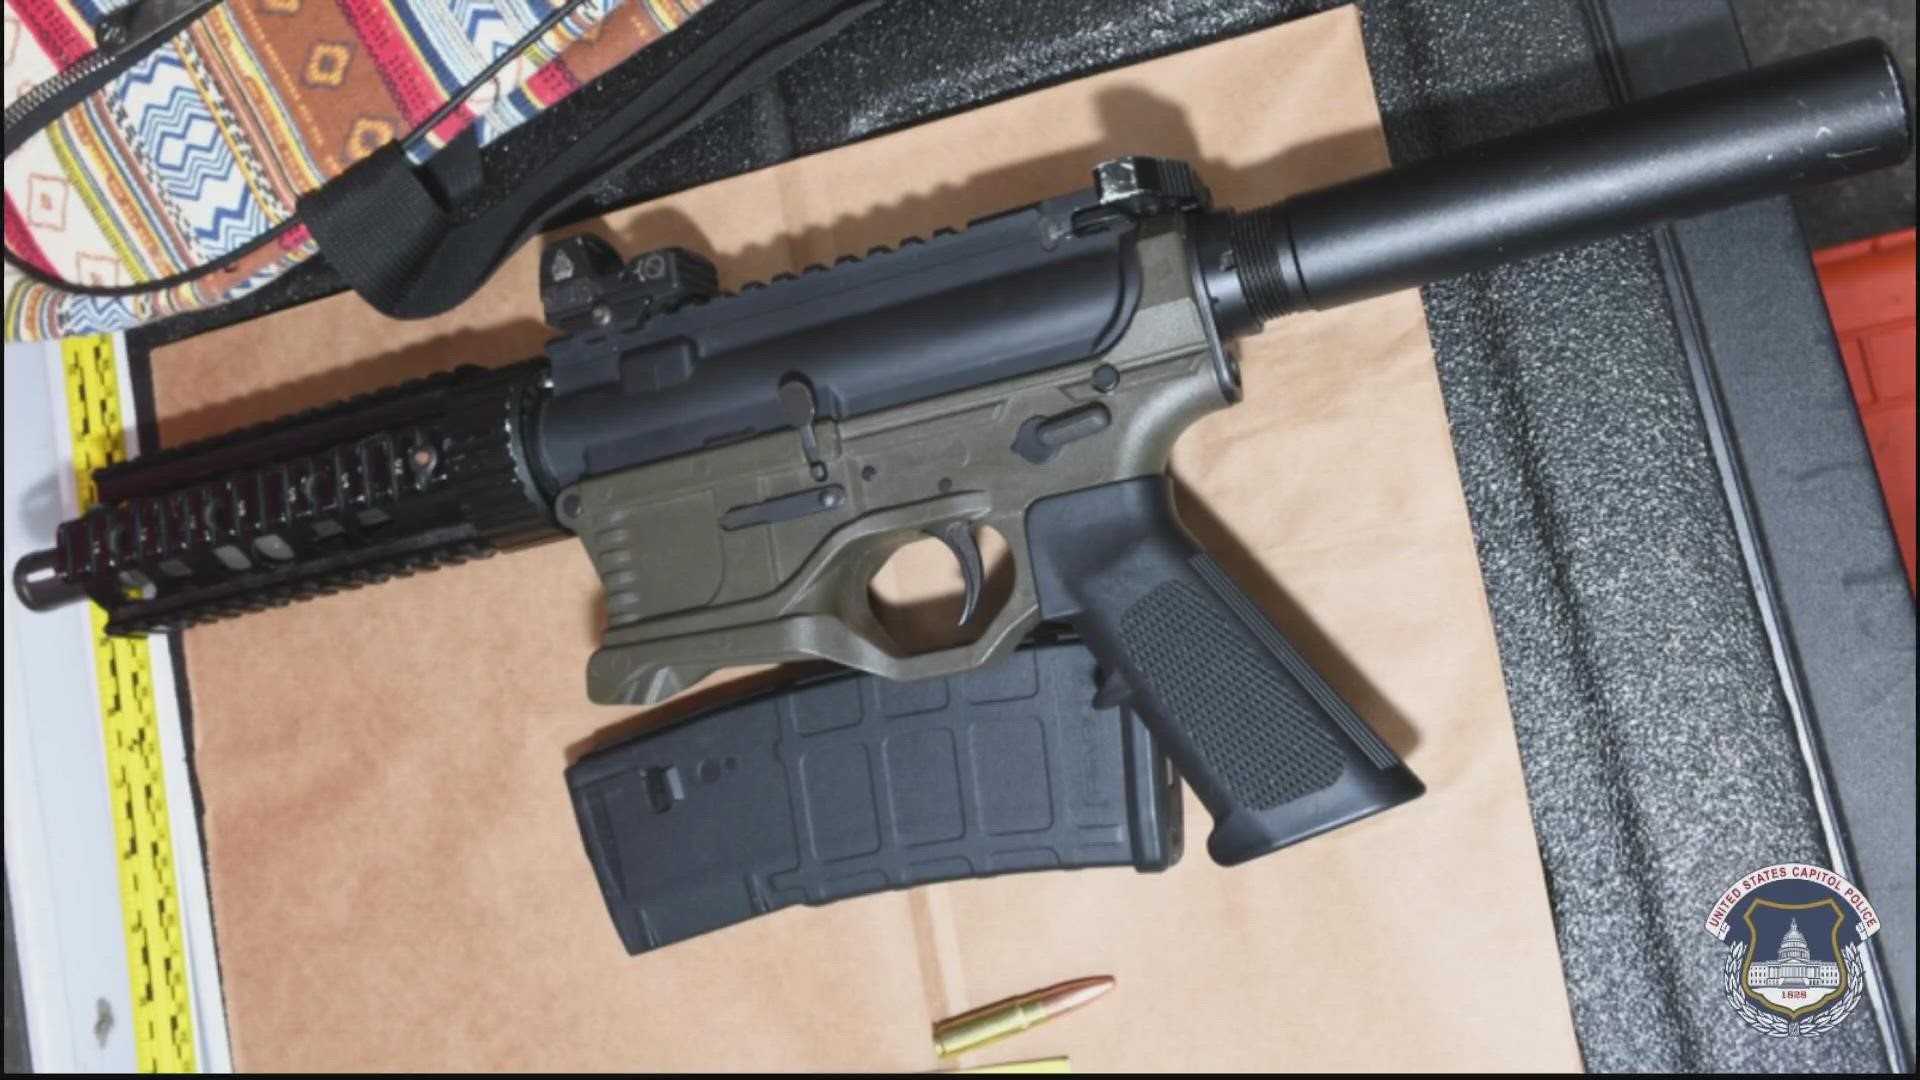 USCP officers claim they found an M-4 style “ghost gun” and a Glock handgun with a full auto switch (machine gun) near the Capitol Complex.